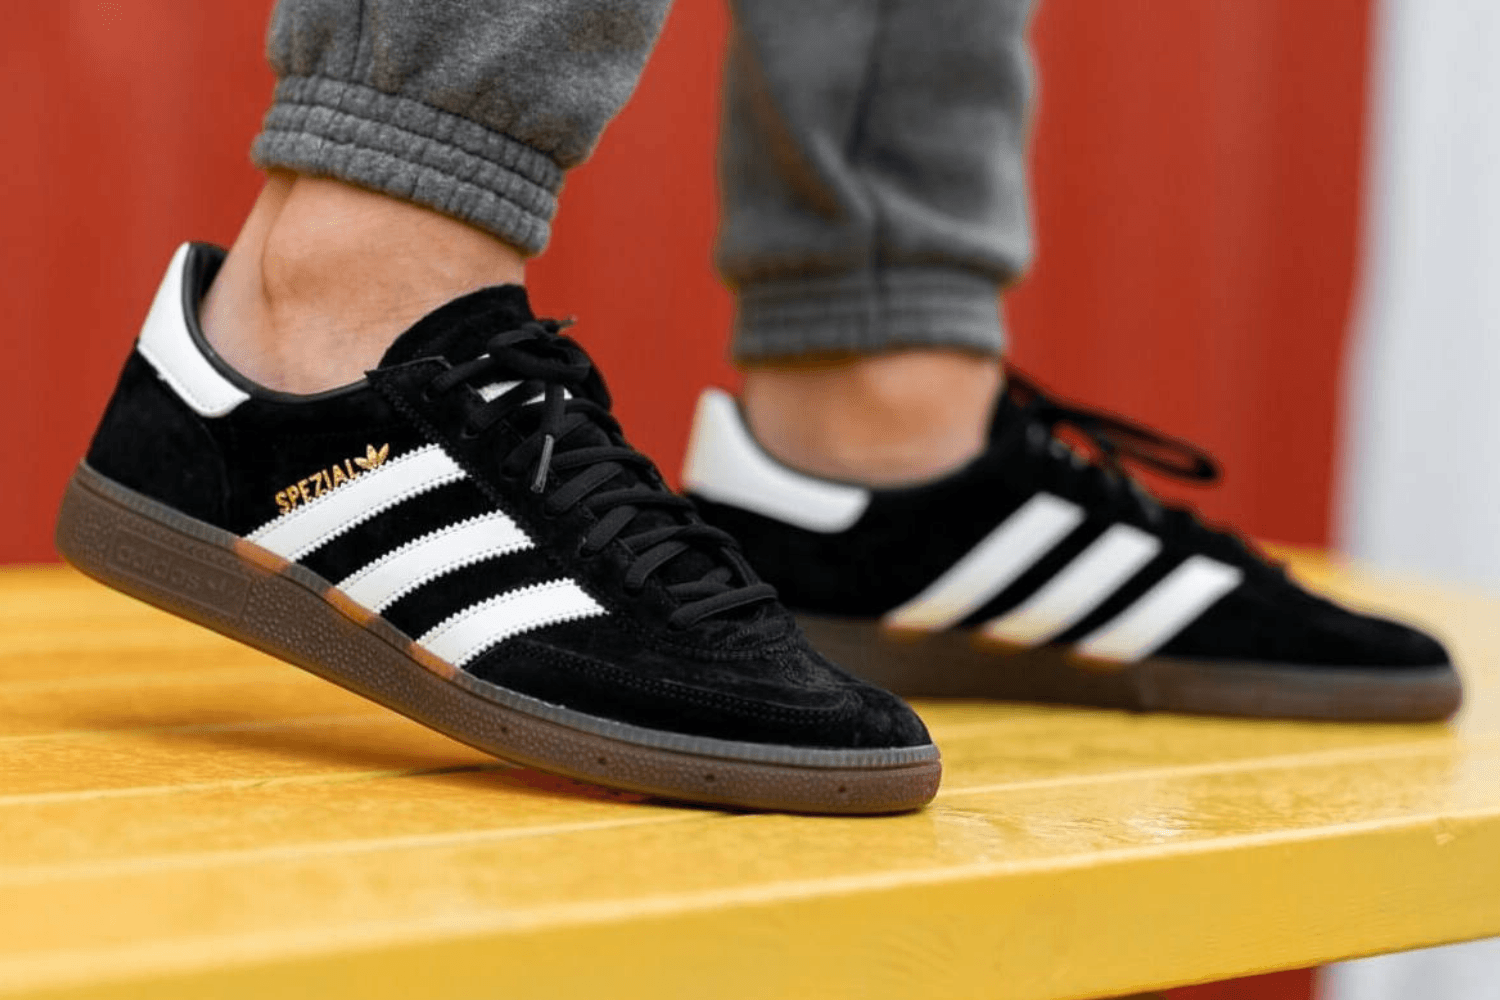 How to style the adidas Spezial?